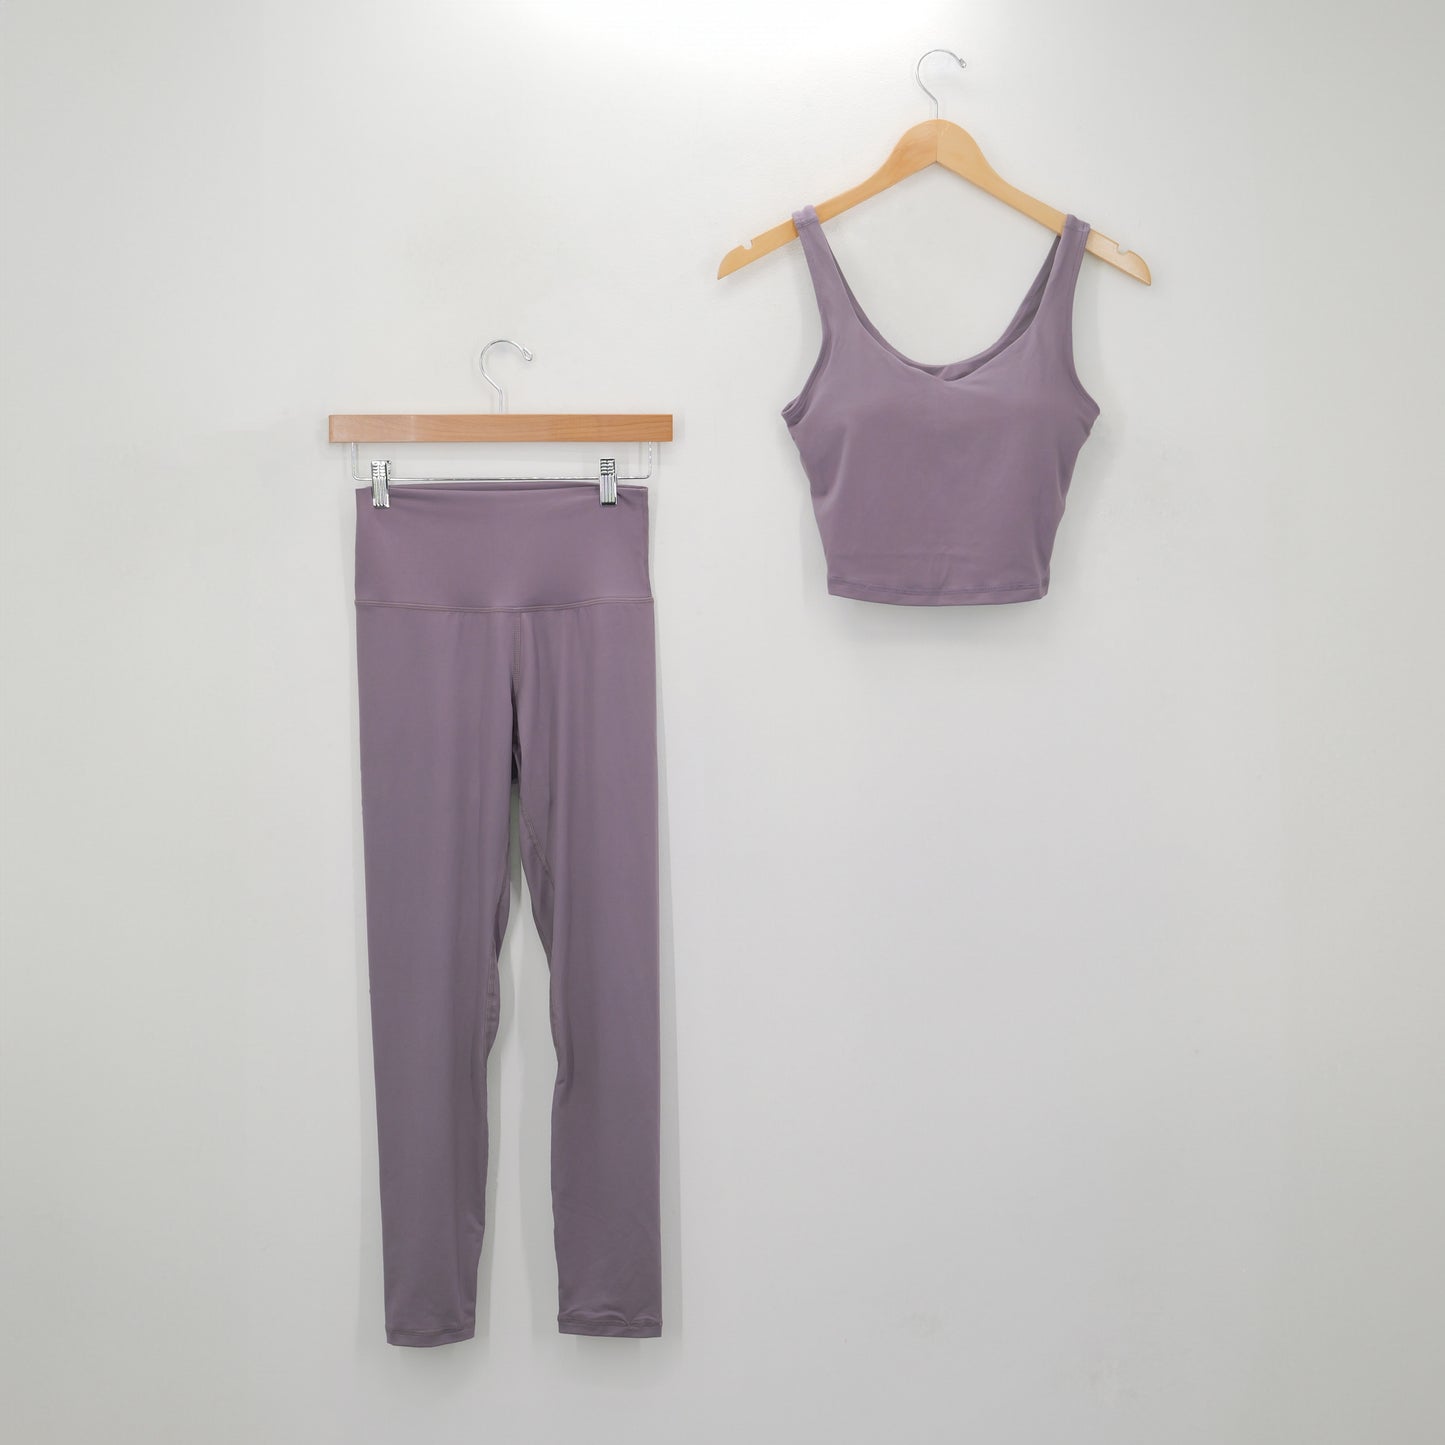 Butter Soft yoga legging set frosted mulberry